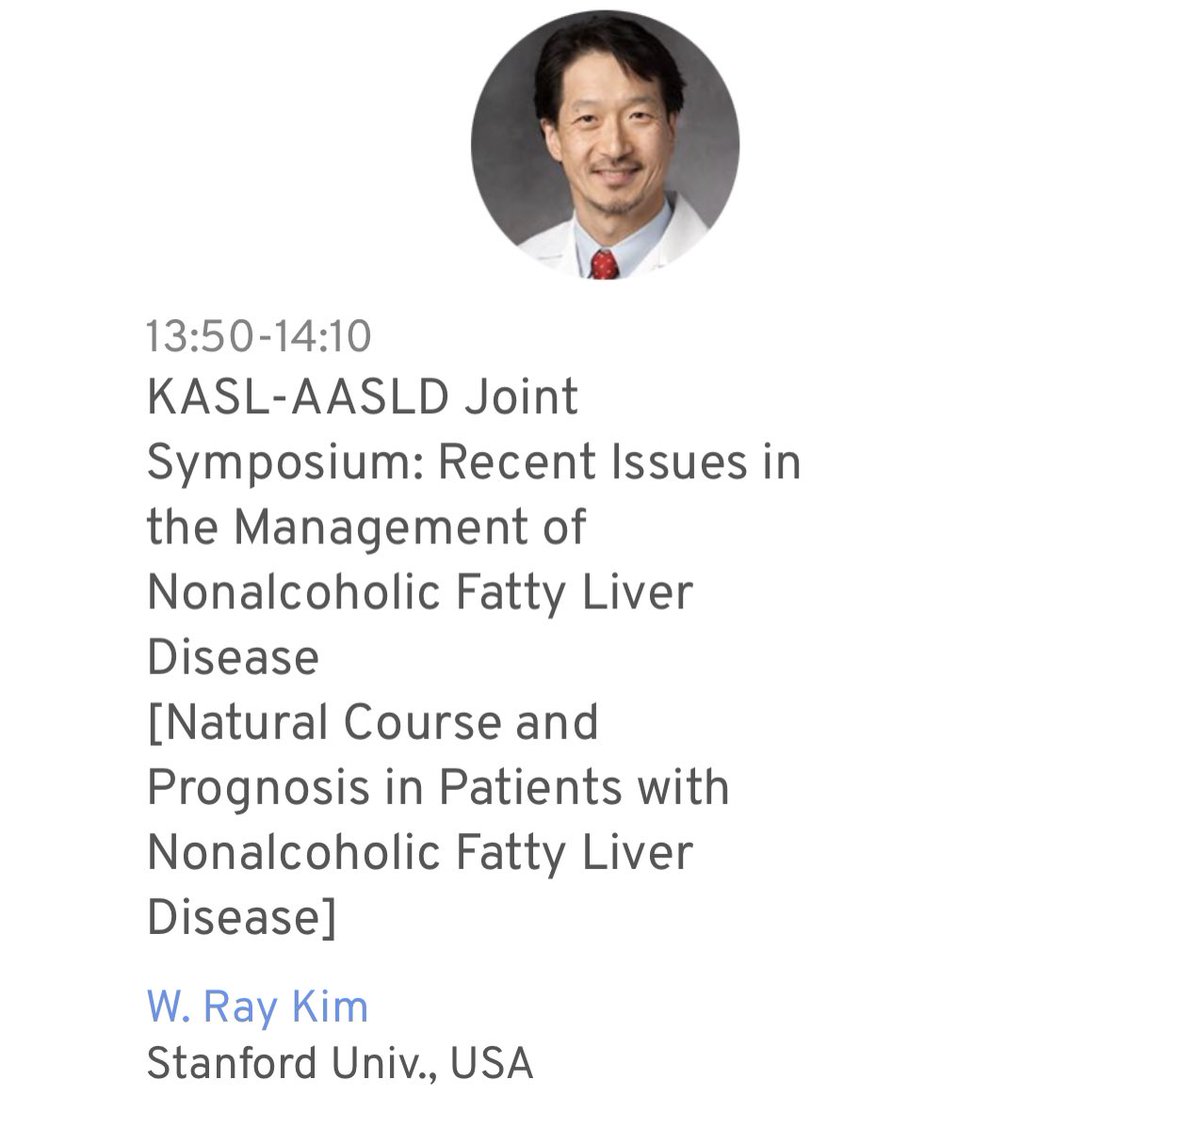 A big shoutout to our division chief @WRayKimMD speaking at the international conference #Liver_week23 ! Incredibly proud to see him shine on the global stage and bring more collaborations home! @AASLDtweets @AmerGastroAssn @JasmohanBajaj #livertwitter #gitwitter